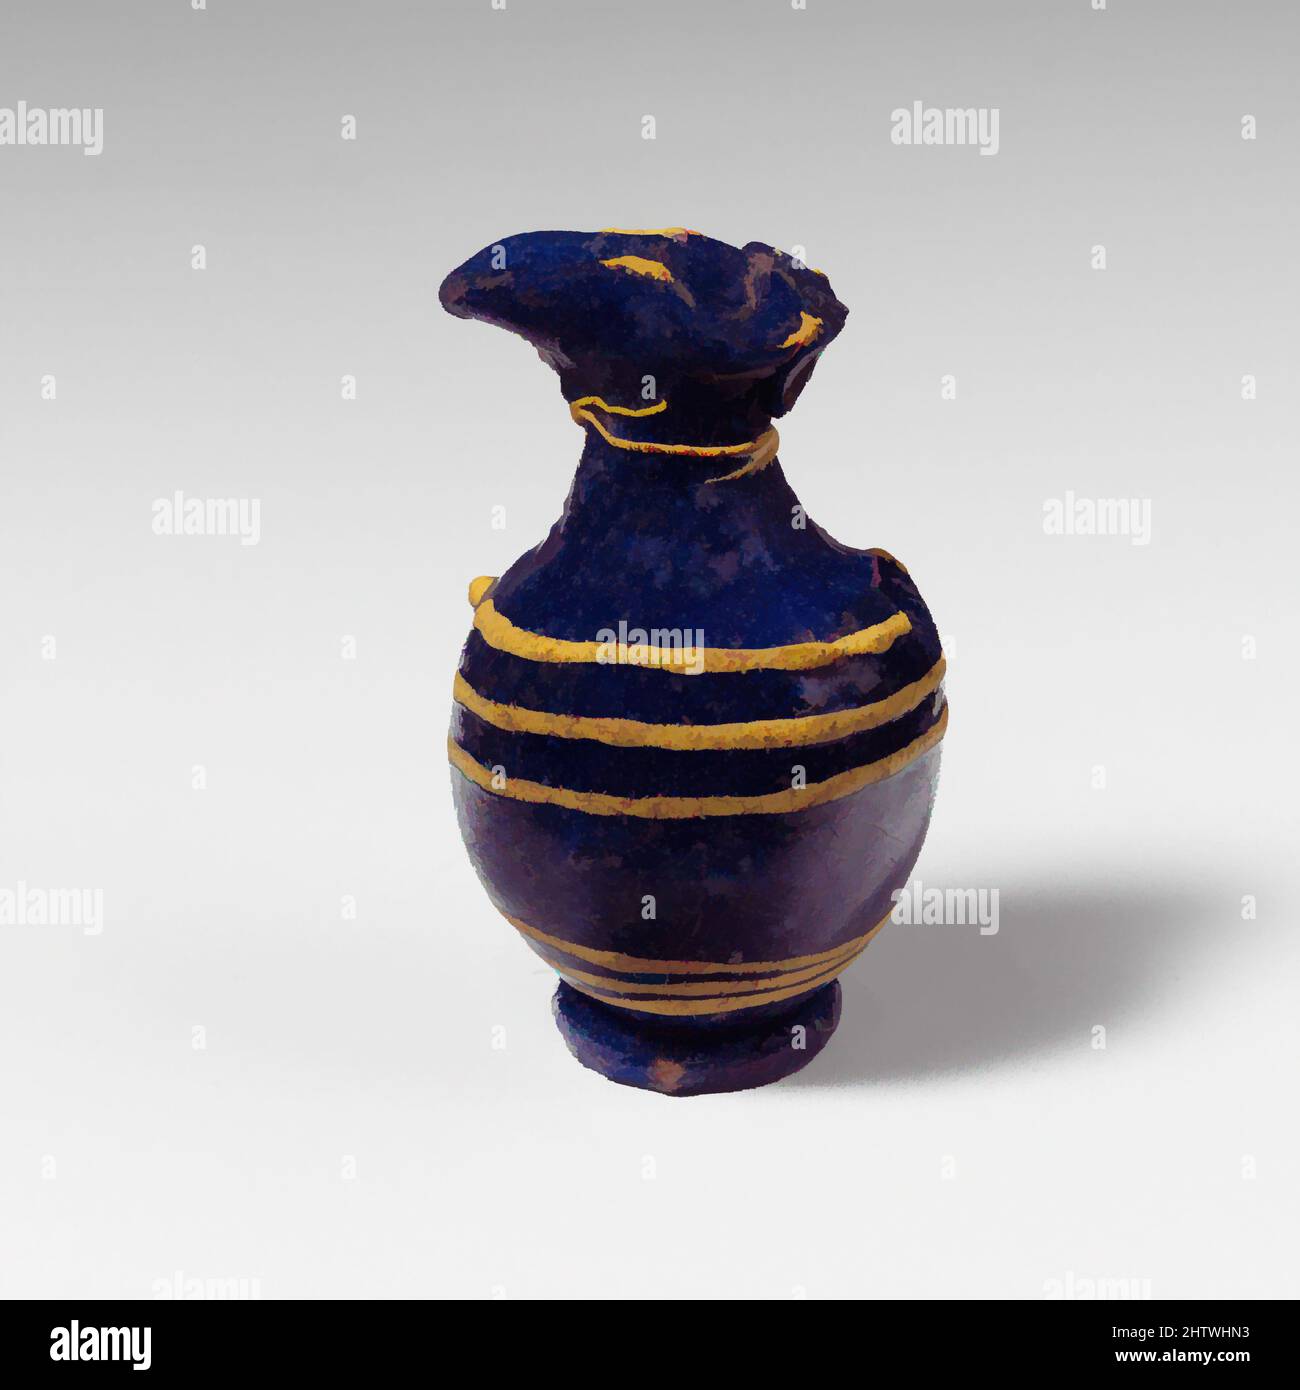 Art inspired by Glass oinochoe (perfume jug), Late Classical or Hellenistic, 4th–3rd century B.C., Eastern Mediterranean or Italian, Glass; core-formed, Group II, H.: 2 in. (5.1 cm), Glass, Translucent cobalt blue, with handle in same color; trails in opaque yellow. Elongated trefoil, Classic works modernized by Artotop with a splash of modernity. Shapes, color and value, eye-catching visual impact on art. Emotions through freedom of artworks in a contemporary way. A timeless message pursuing a wildly creative new direction. Artists turning to the digital medium and creating the Artotop NFT Stock Photo